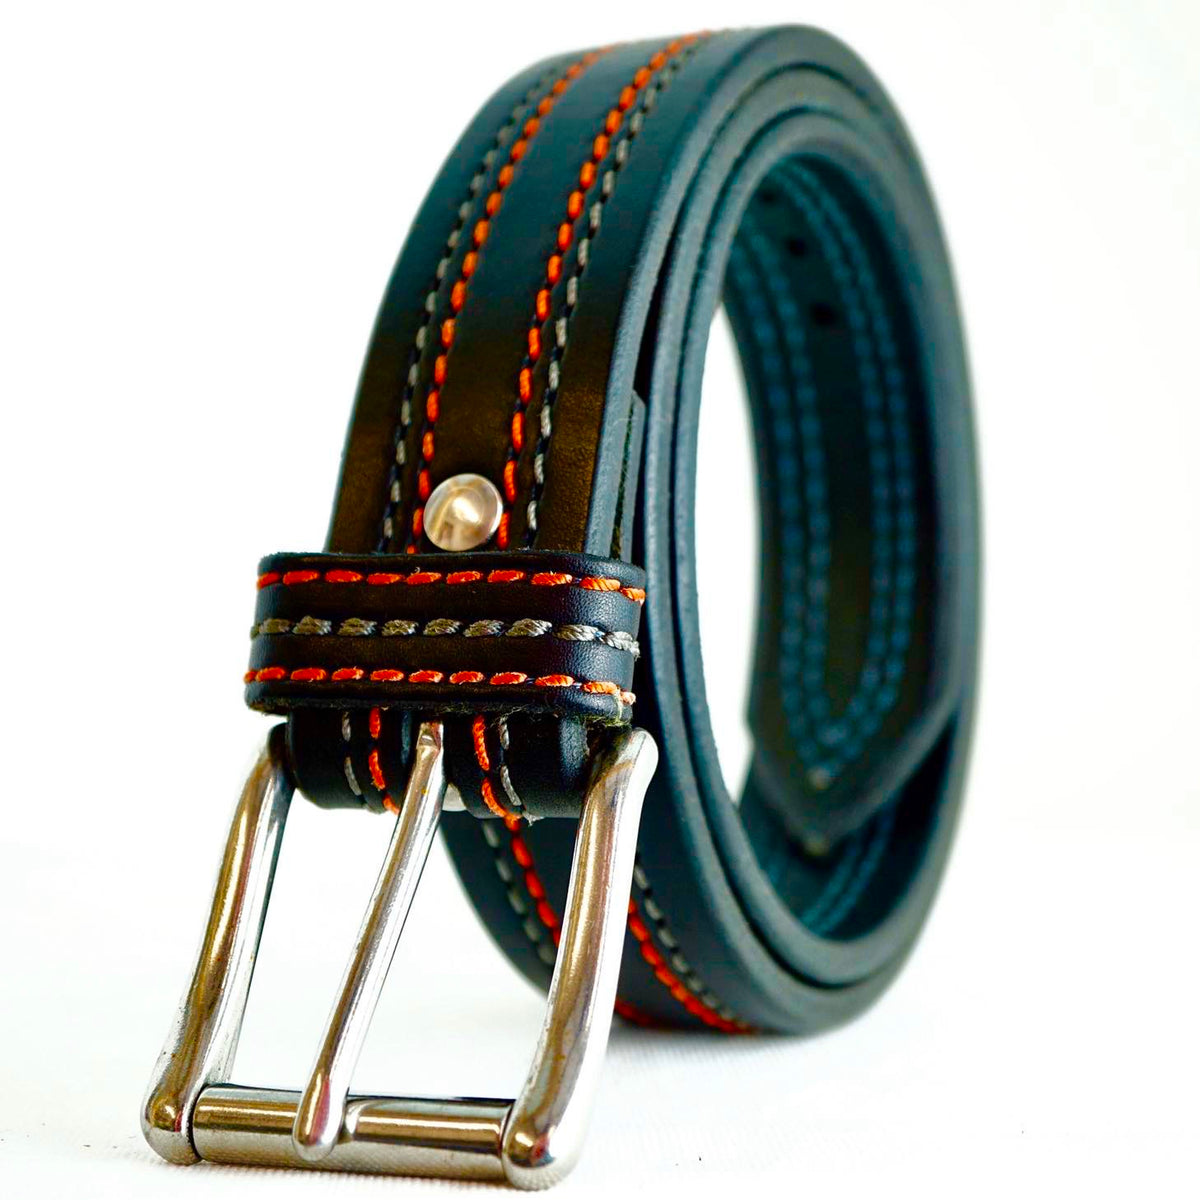 The MCQUEEN 1.5 Leather Belt